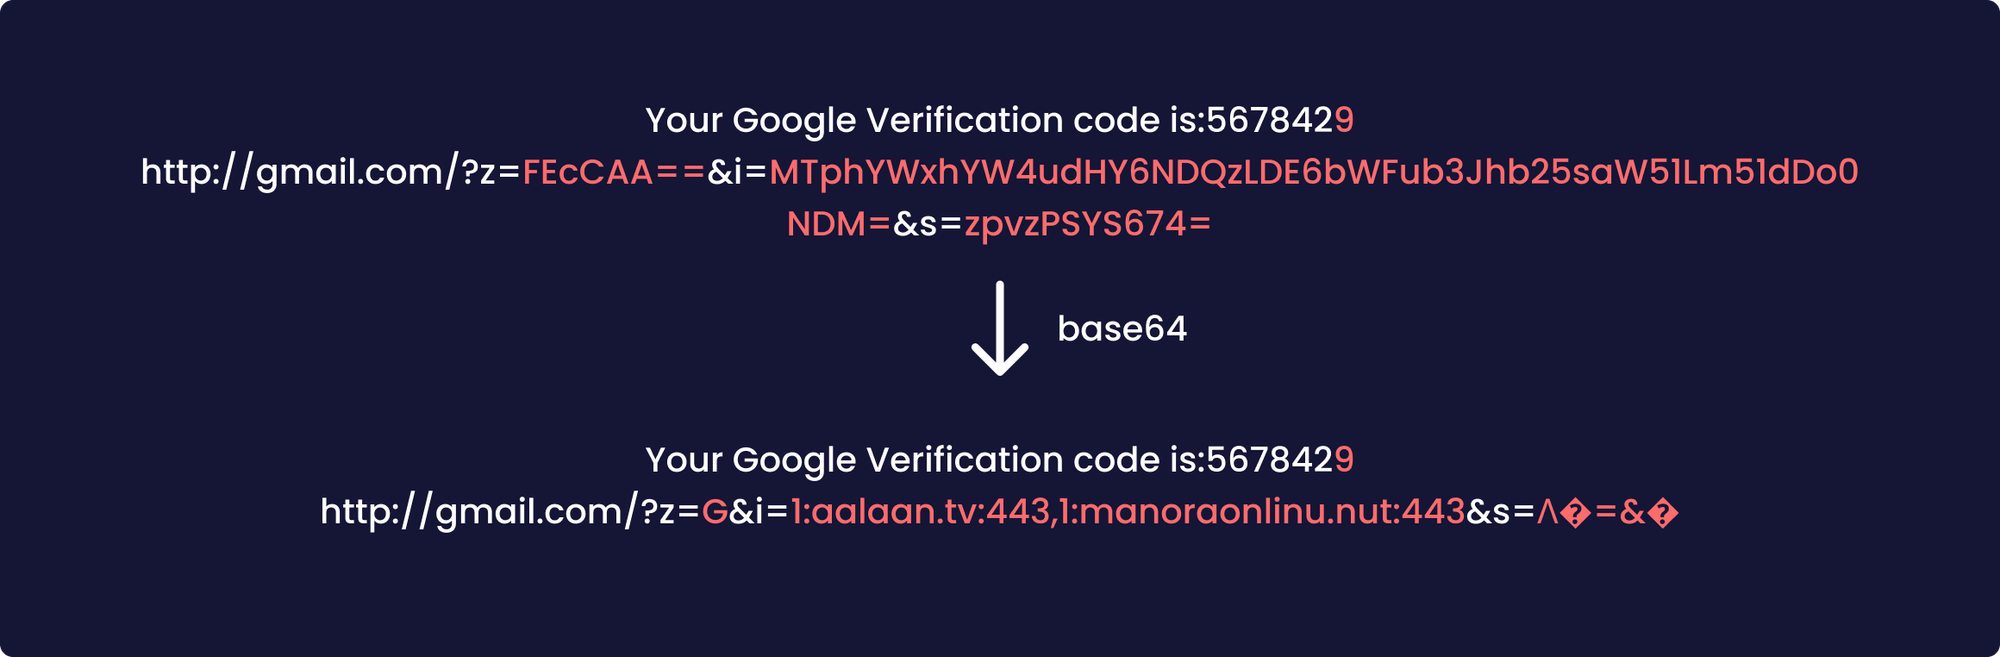 Your Google Verification code is:5678429
